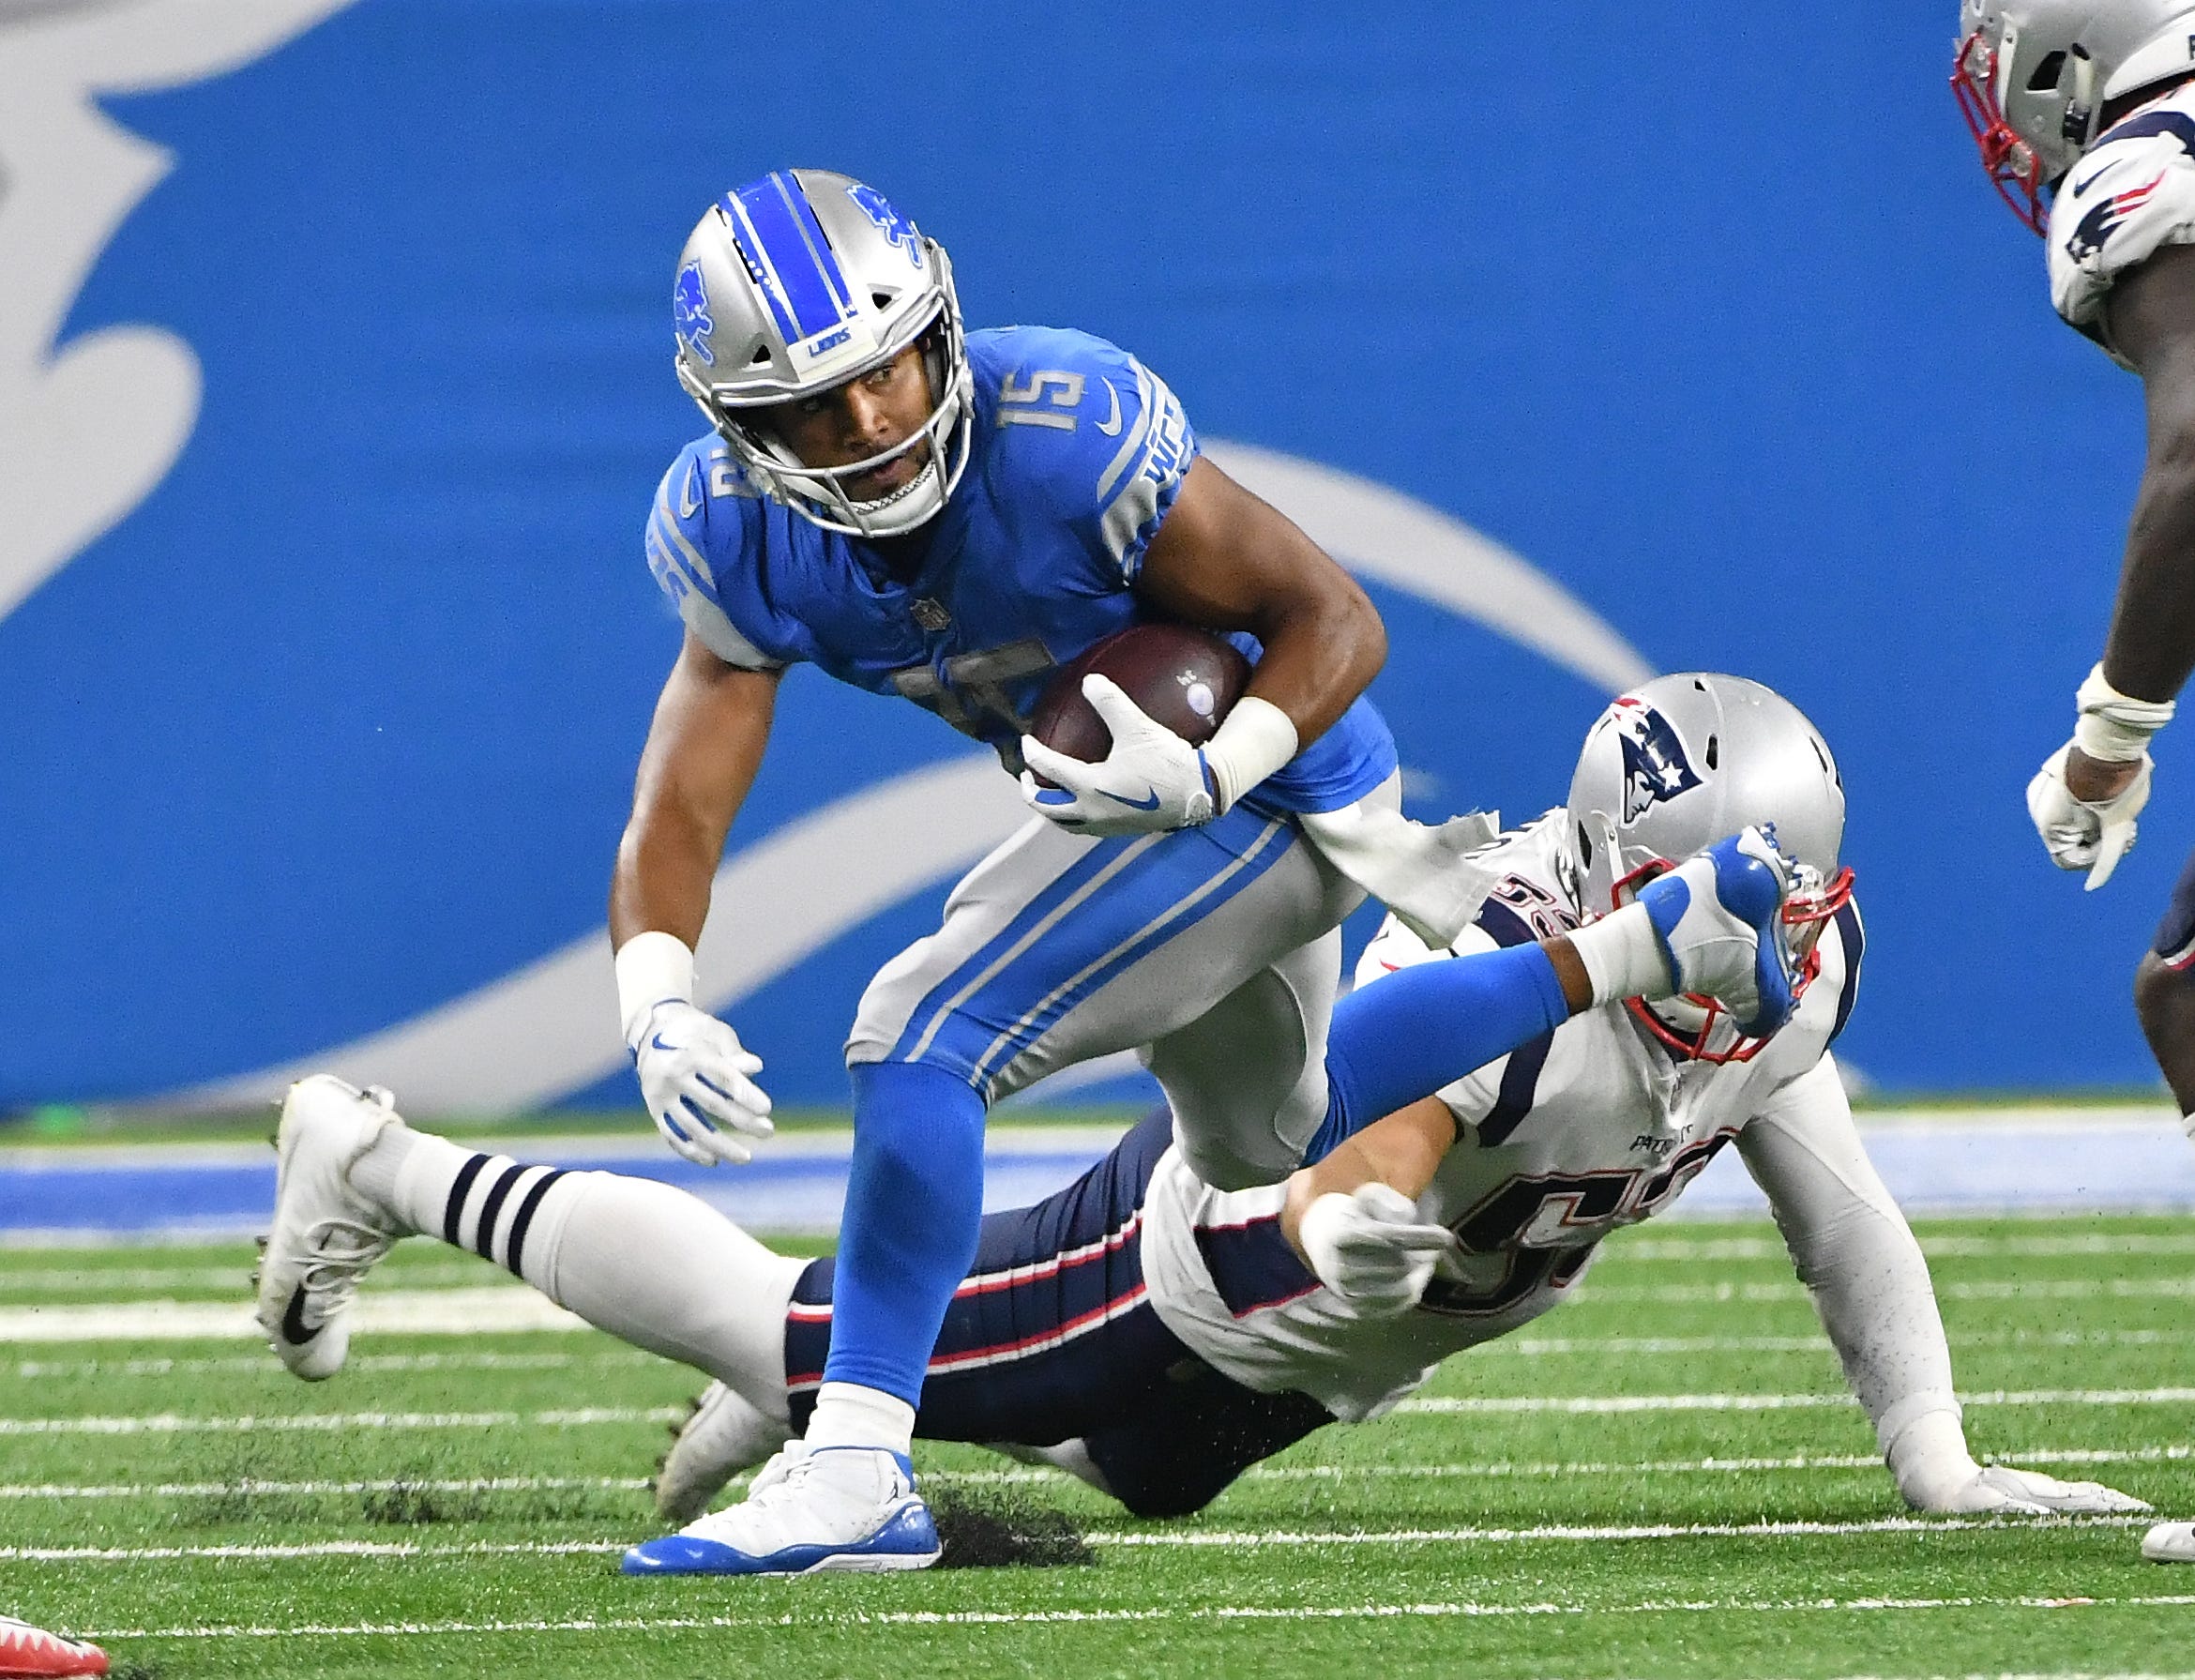 Lions' Golden Tate runs after a reception in the second quarter.